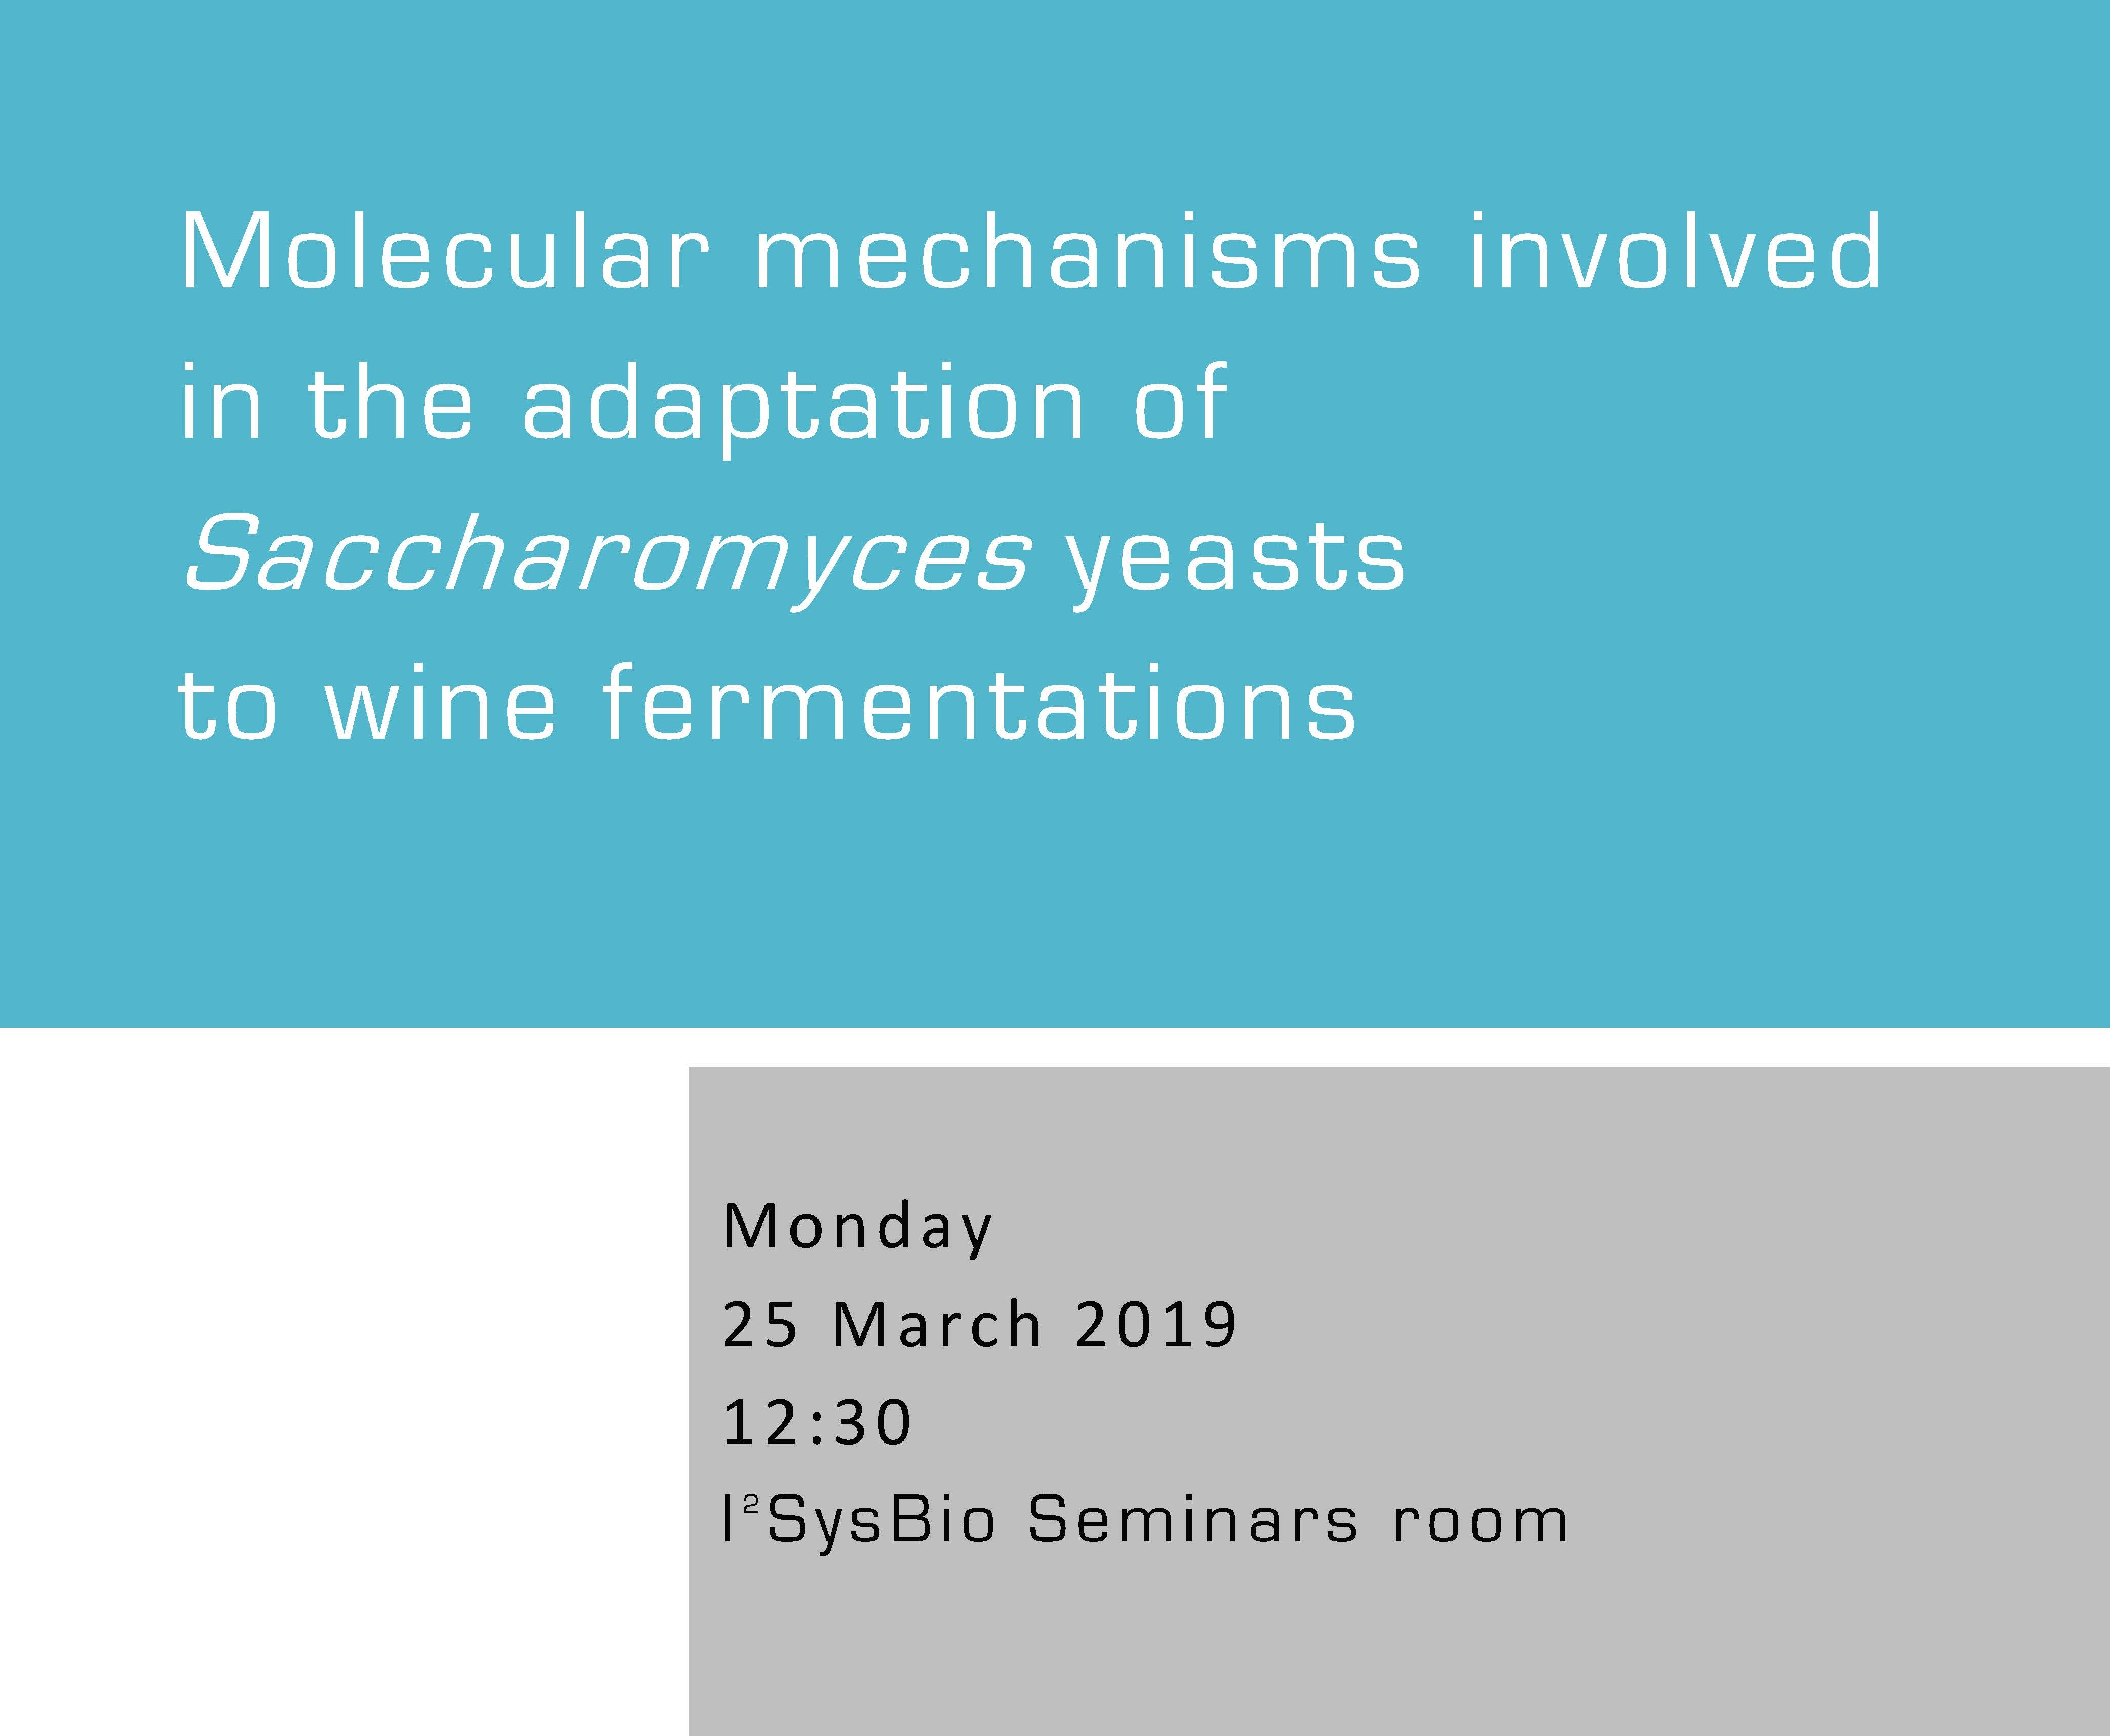 Molecular mechanisms involved in the adaptation of Saccharomyces yeasts to wine fermentations